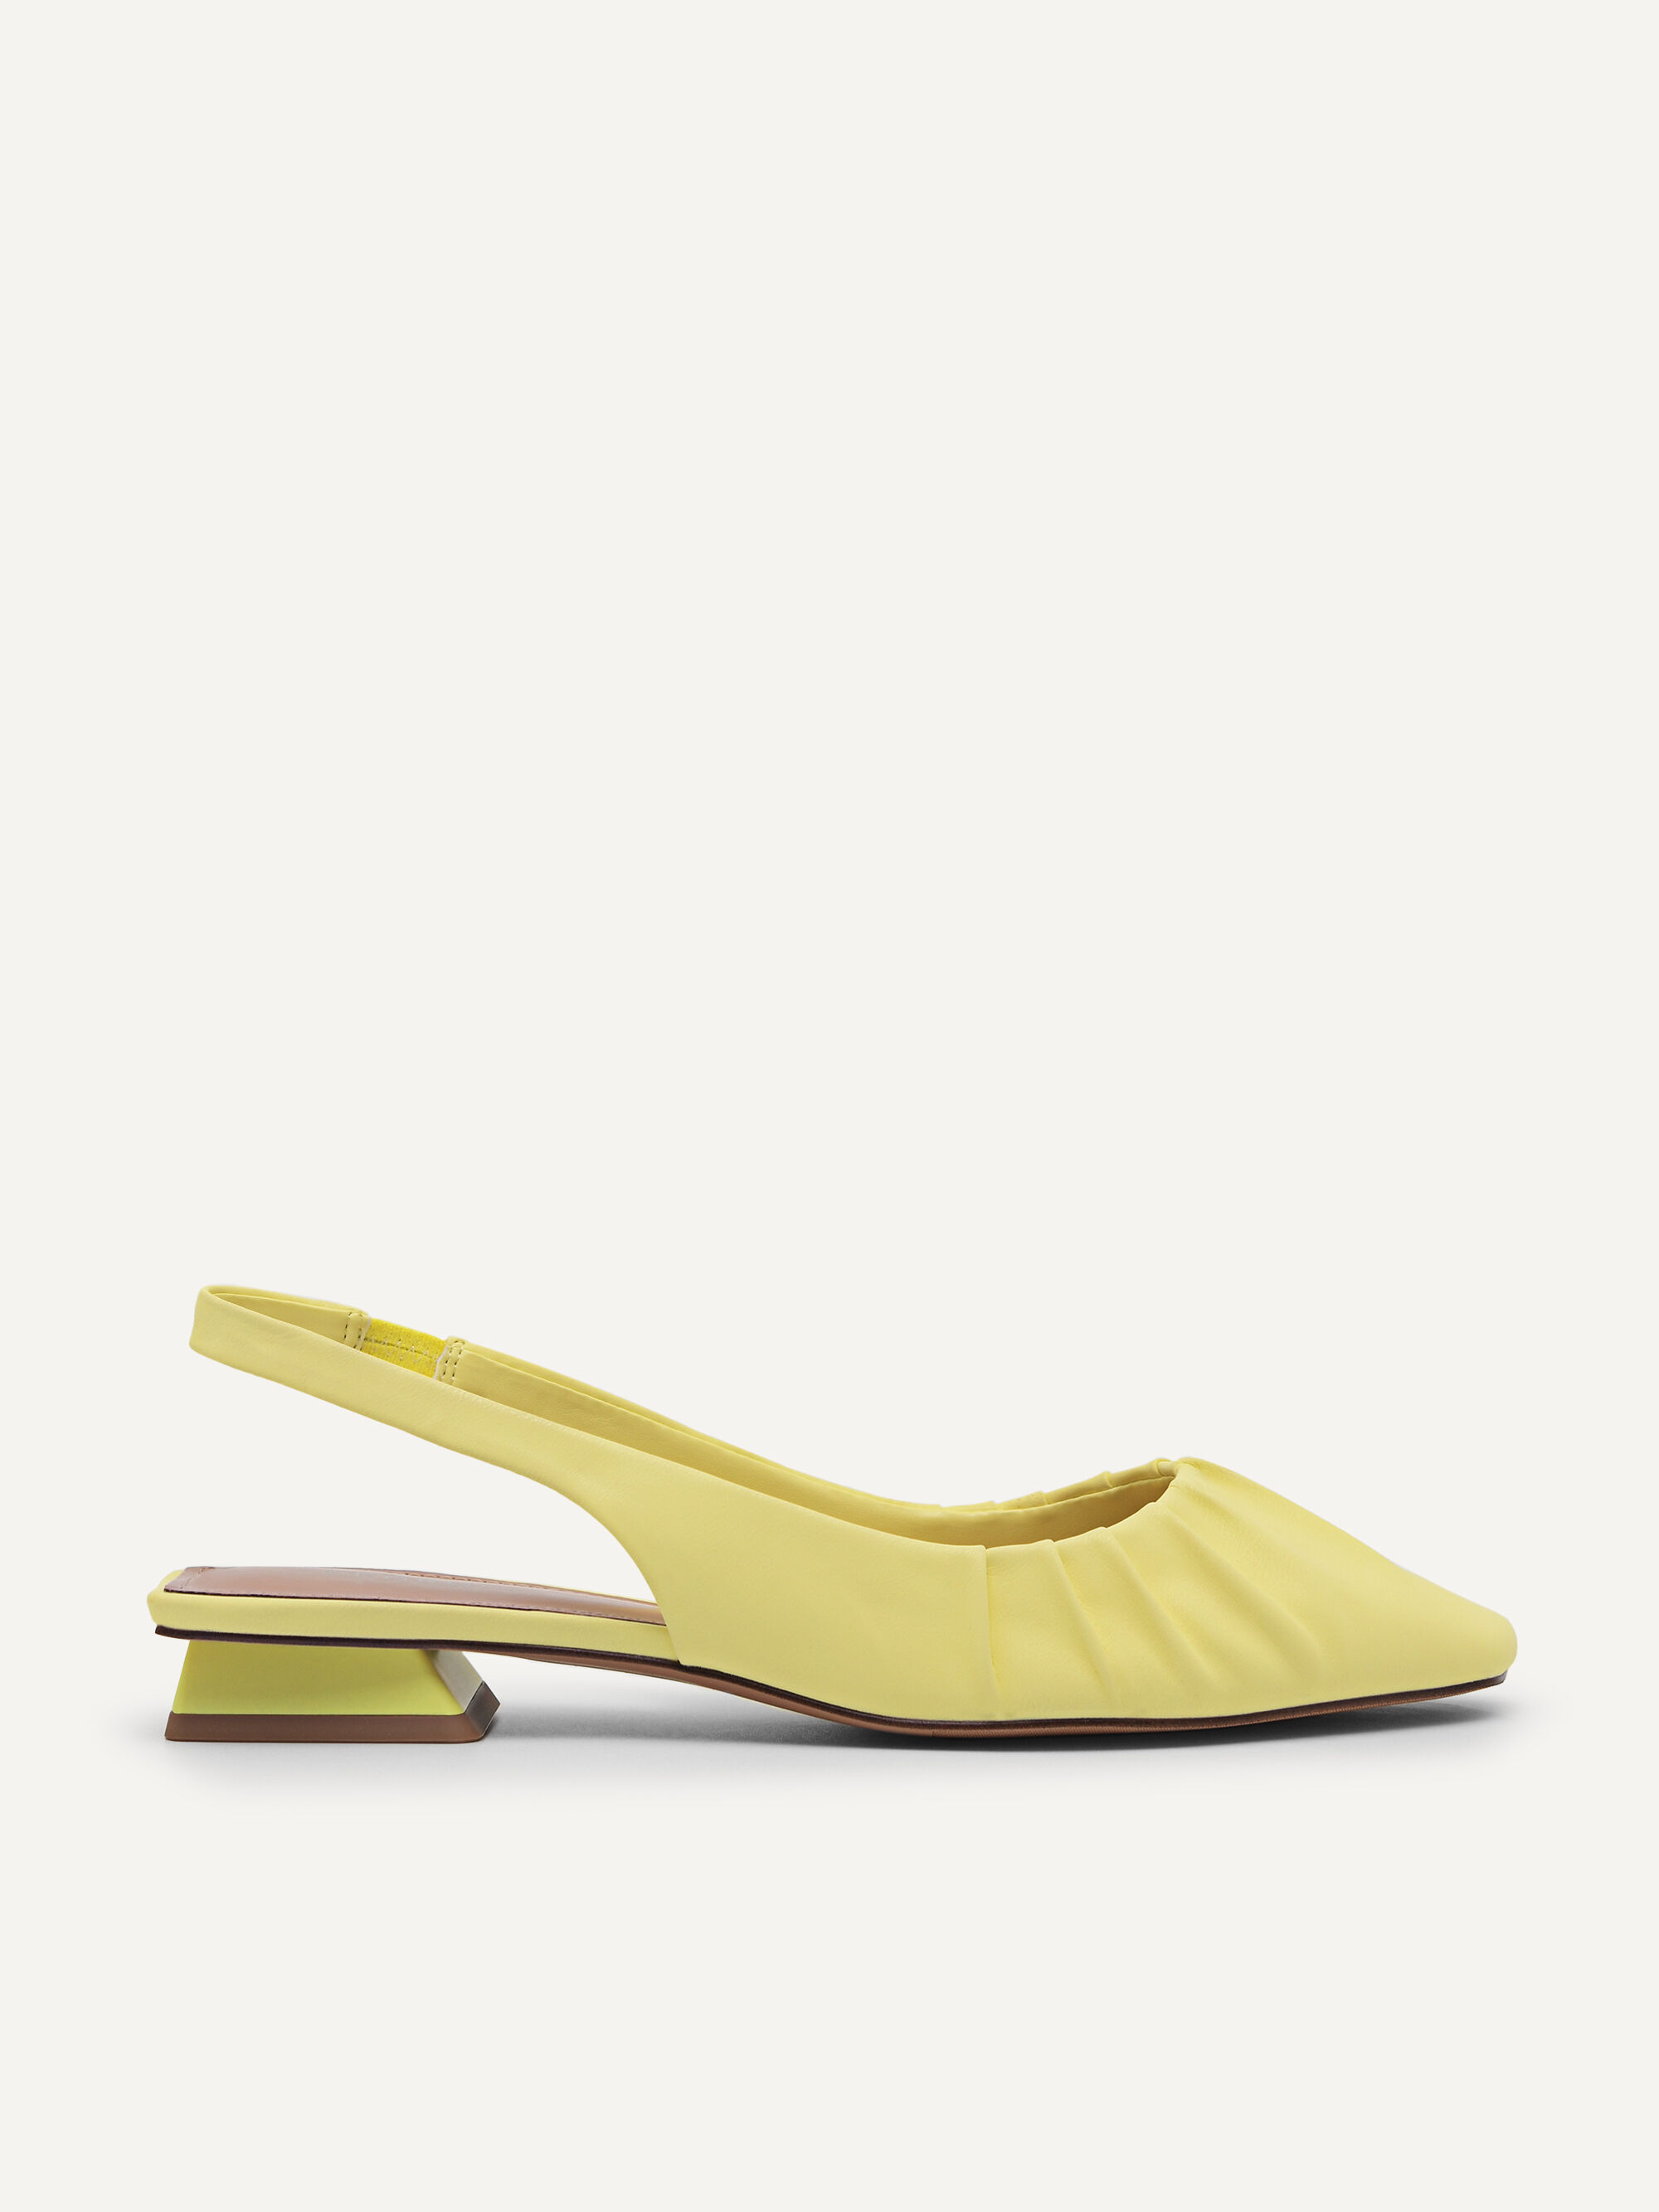 Dolce & Gabbana Slingback Pumps in Yellow | Lyst